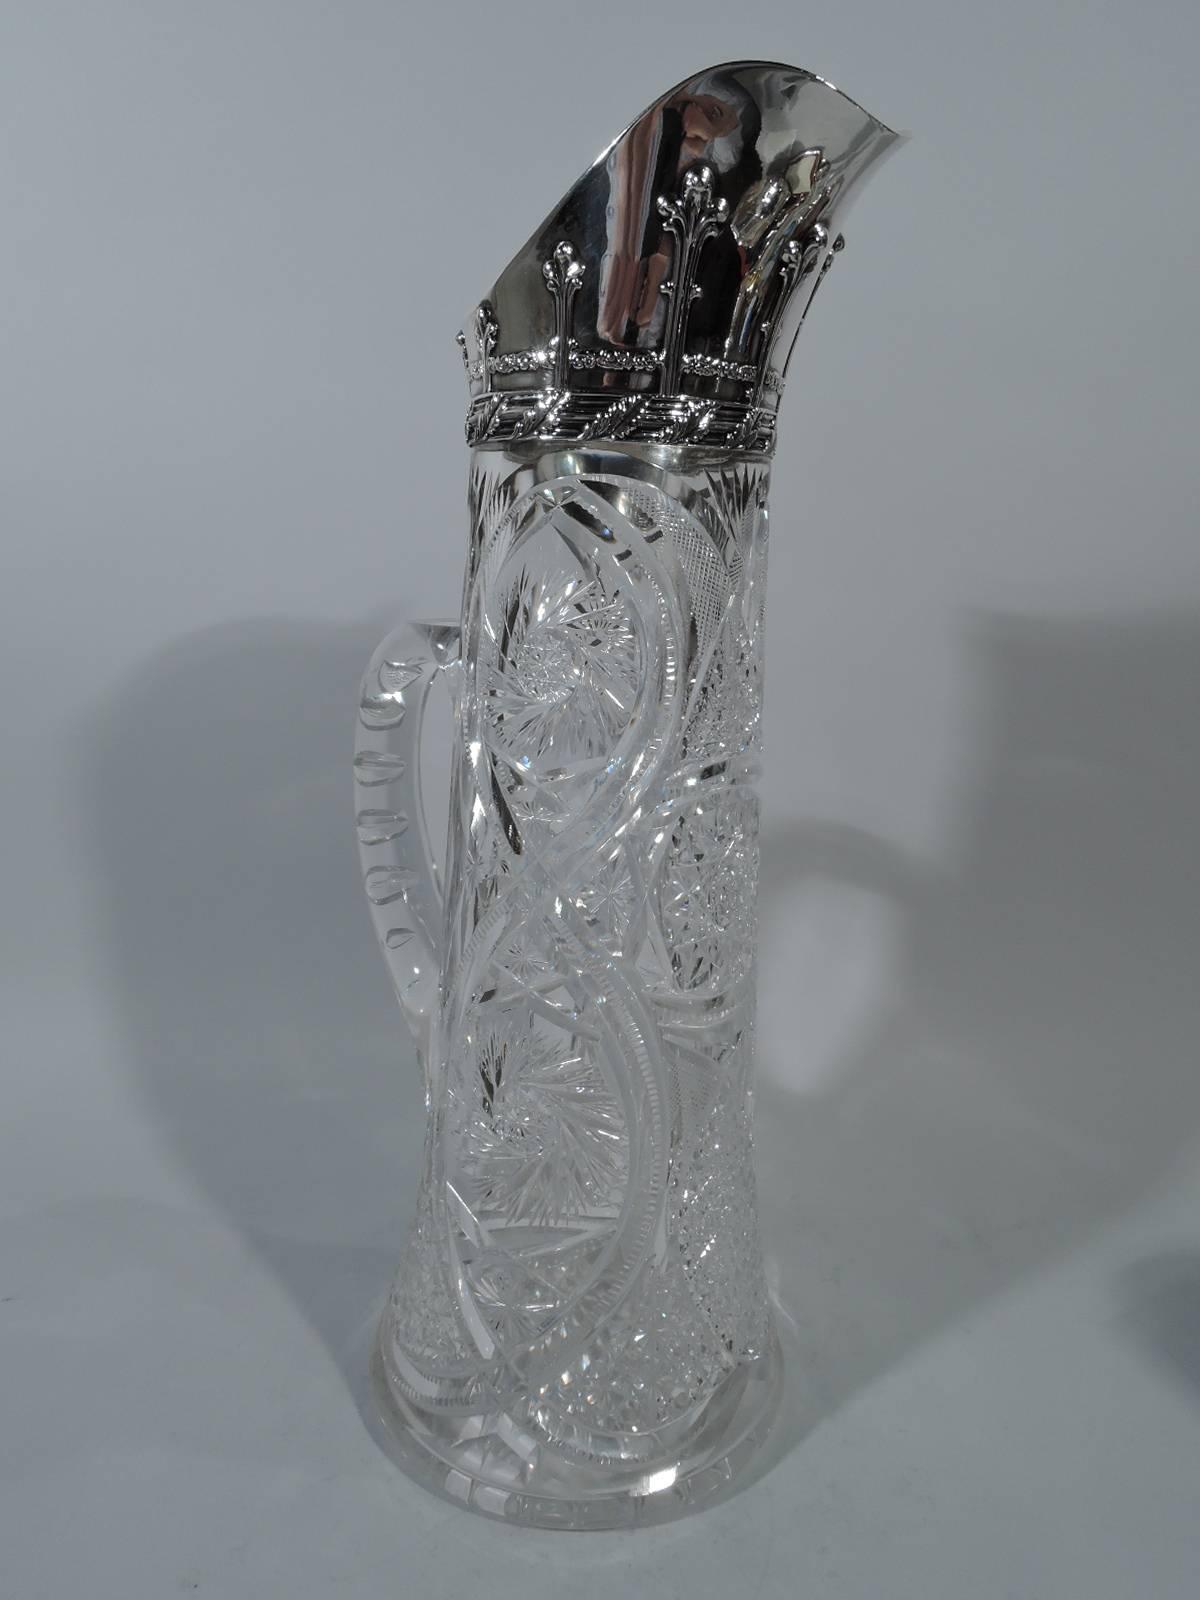 Gilded Age brilliant cut-glass claret jug with sterling silver collar. Made by Tiffany & Co. in New York. Tall and upward tapering with c-scroll handle. Stars, diaper, flowers, and ferns set in interlaced scrolled frame. Collar has helmet mouth with